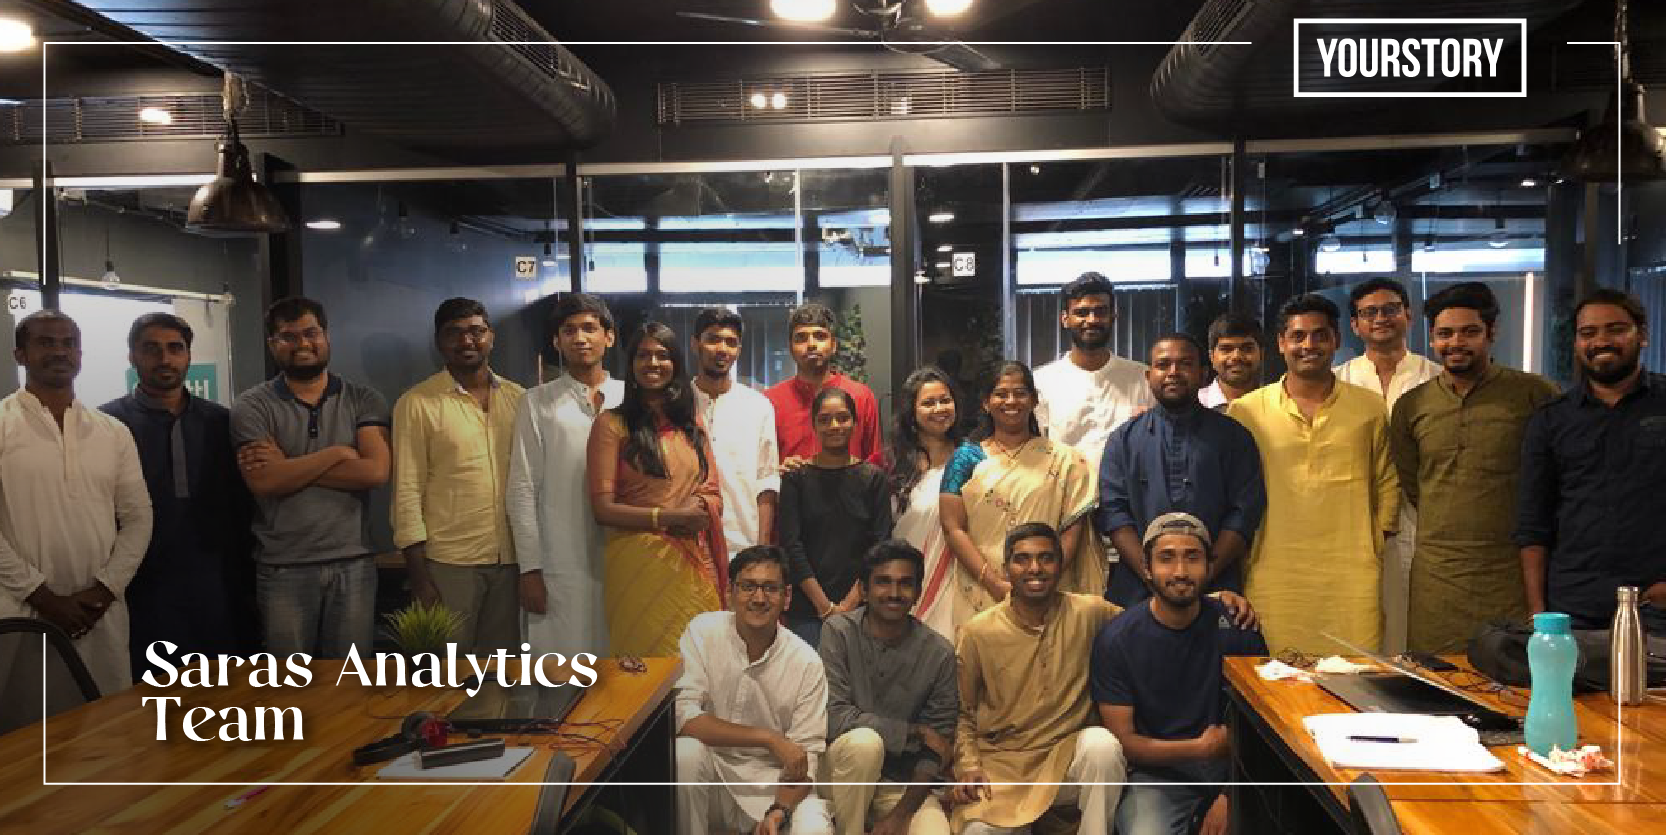 This Hyderabad startup enables ecommerce and D2C customers to take data-driven decisions and drive growth